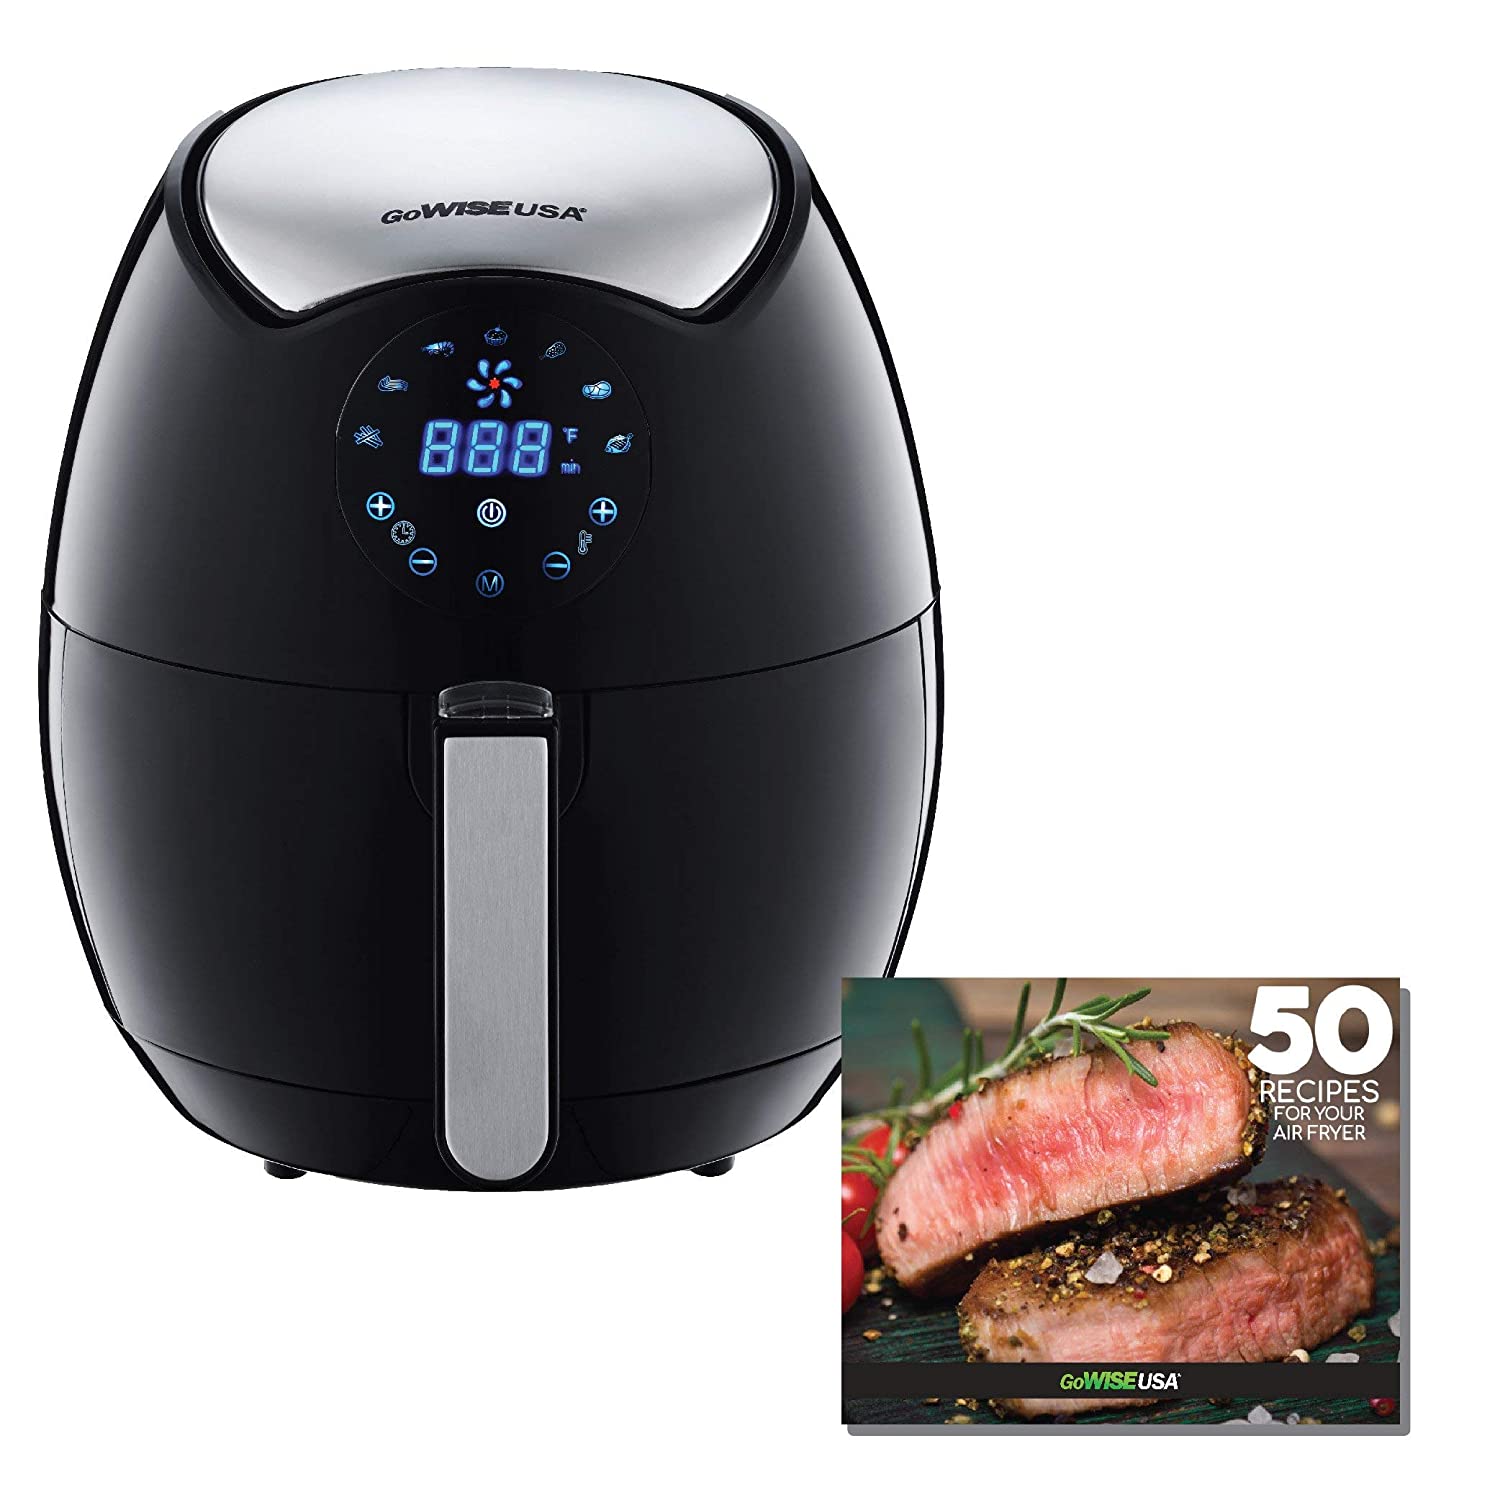 The 10 Best Gowise Usa 37Quart 8In1 Air Fryer